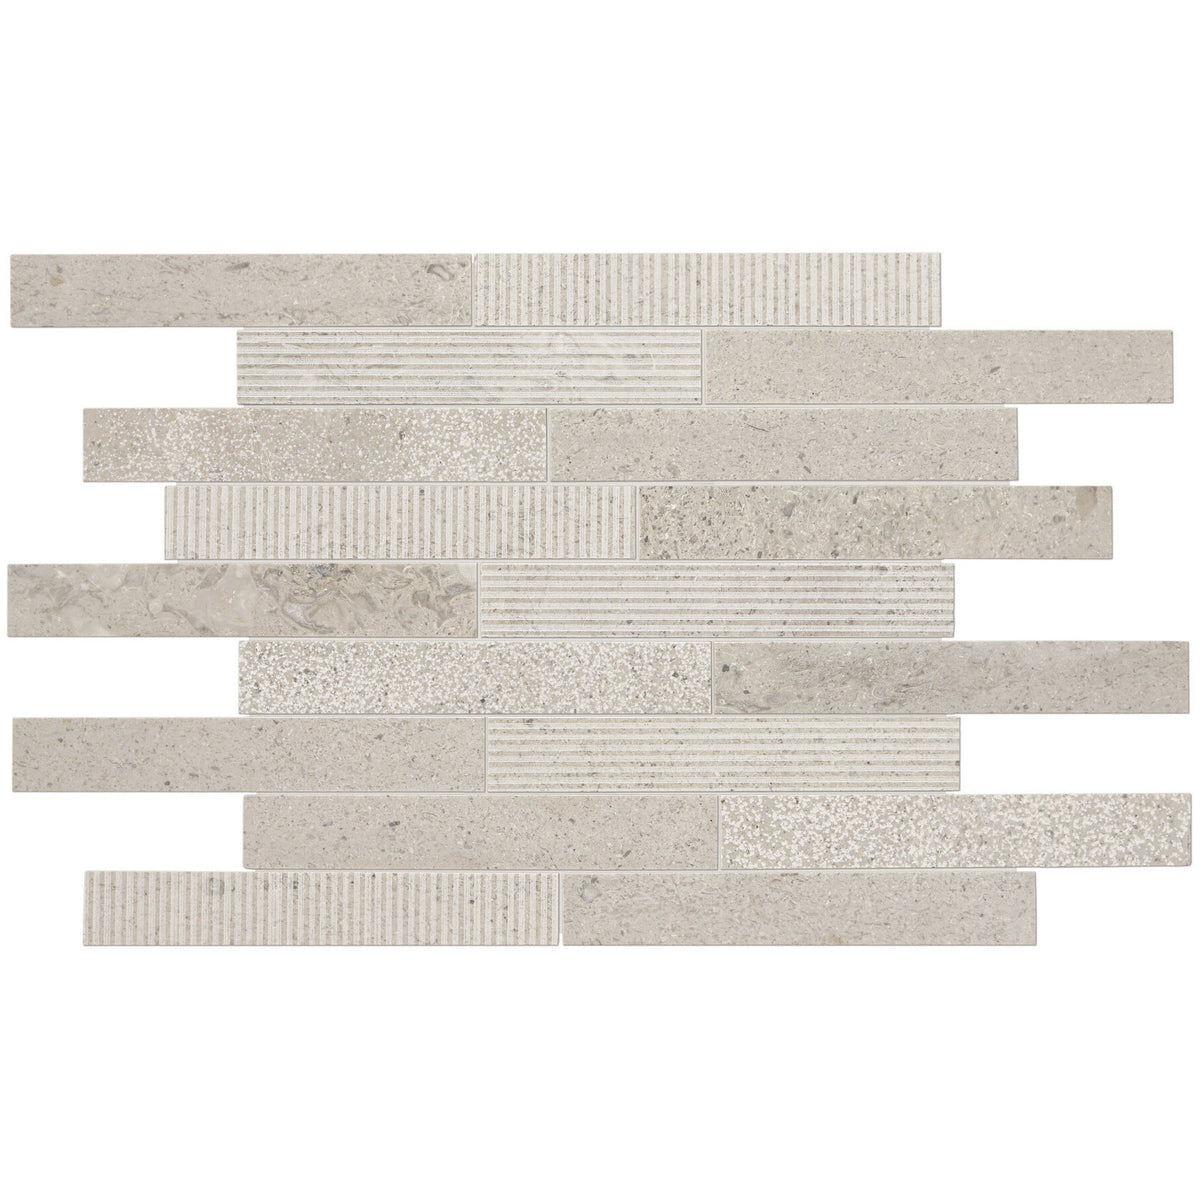 Daltile - Center City - 6 in. x 24 in. Linear Mosaic - Delancey Grey